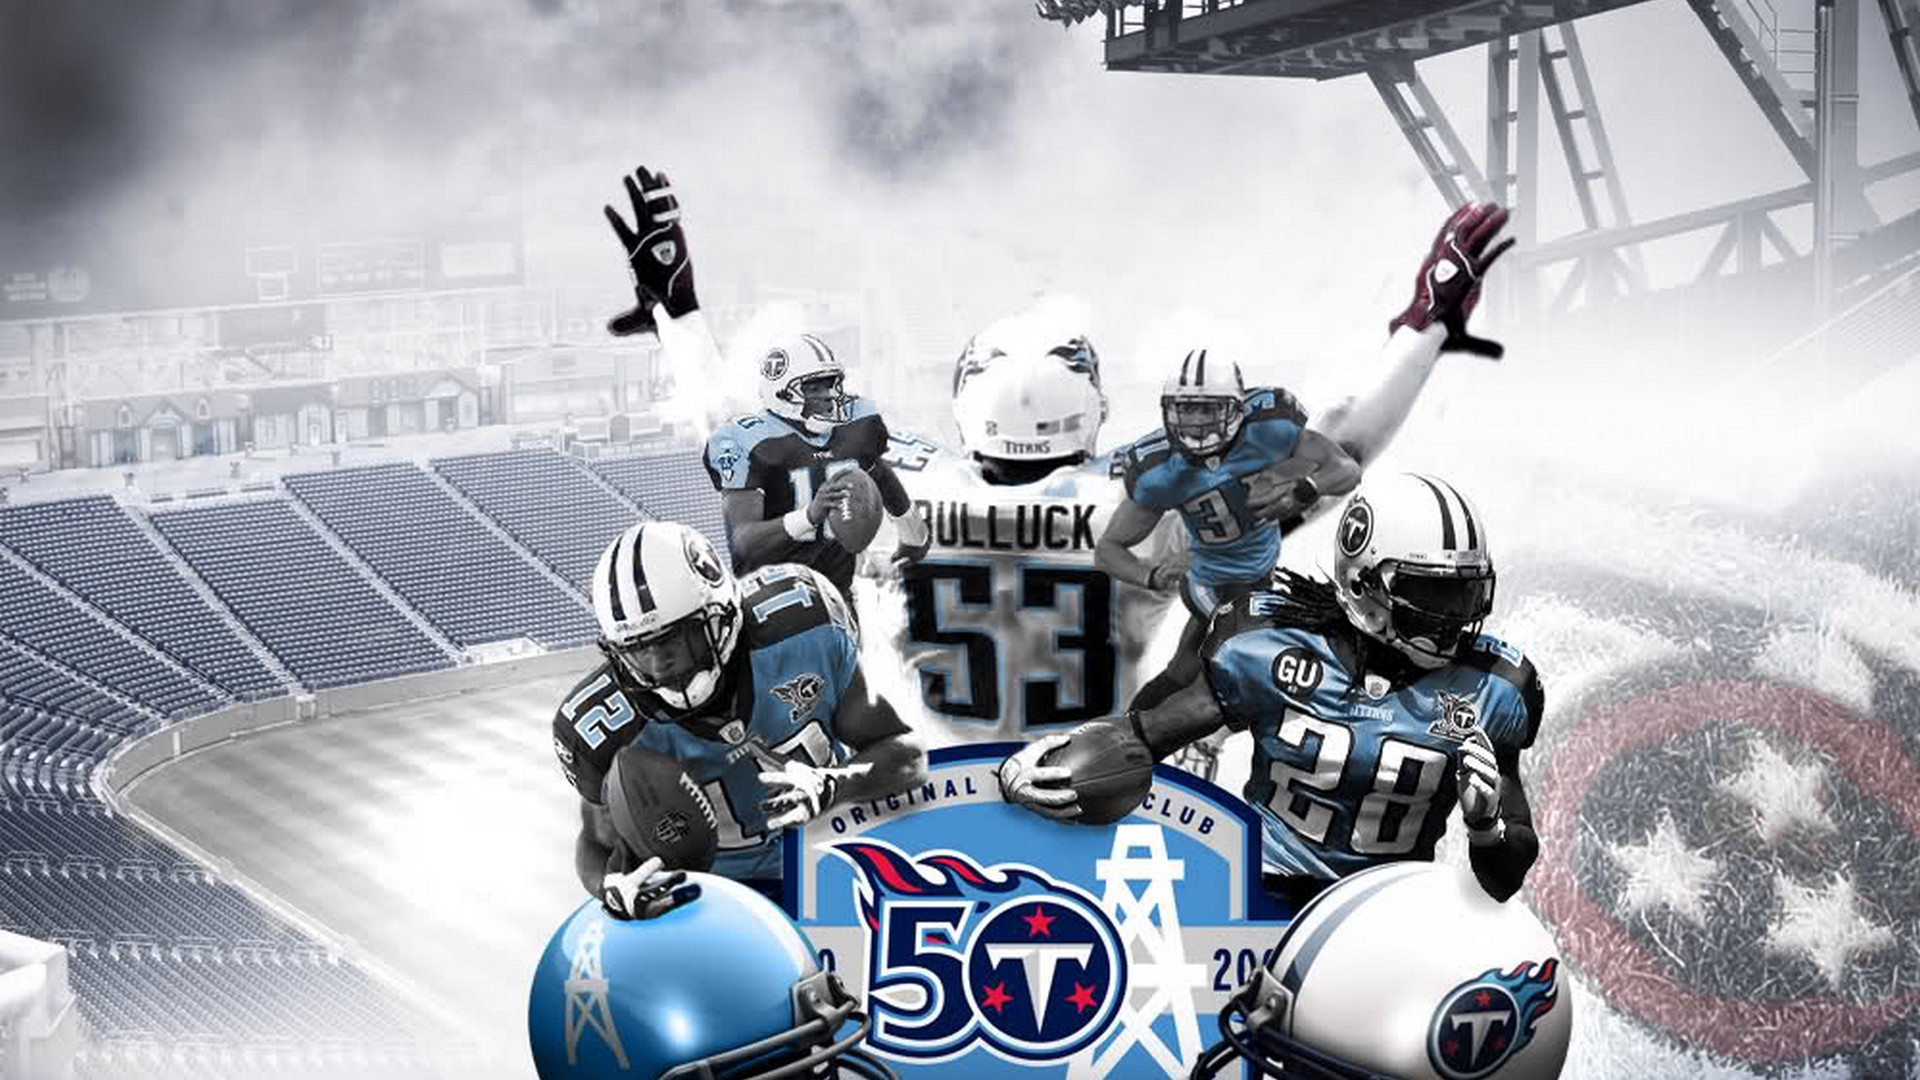 Tennessee Titans Desktop Backgrounds with high-resolution 1920x1080 pixel. Download and set as wallpaper for Desktop Computer, Apple iPhone X, XS Max, XR, 8, 7, 6, SE, iPad, Android